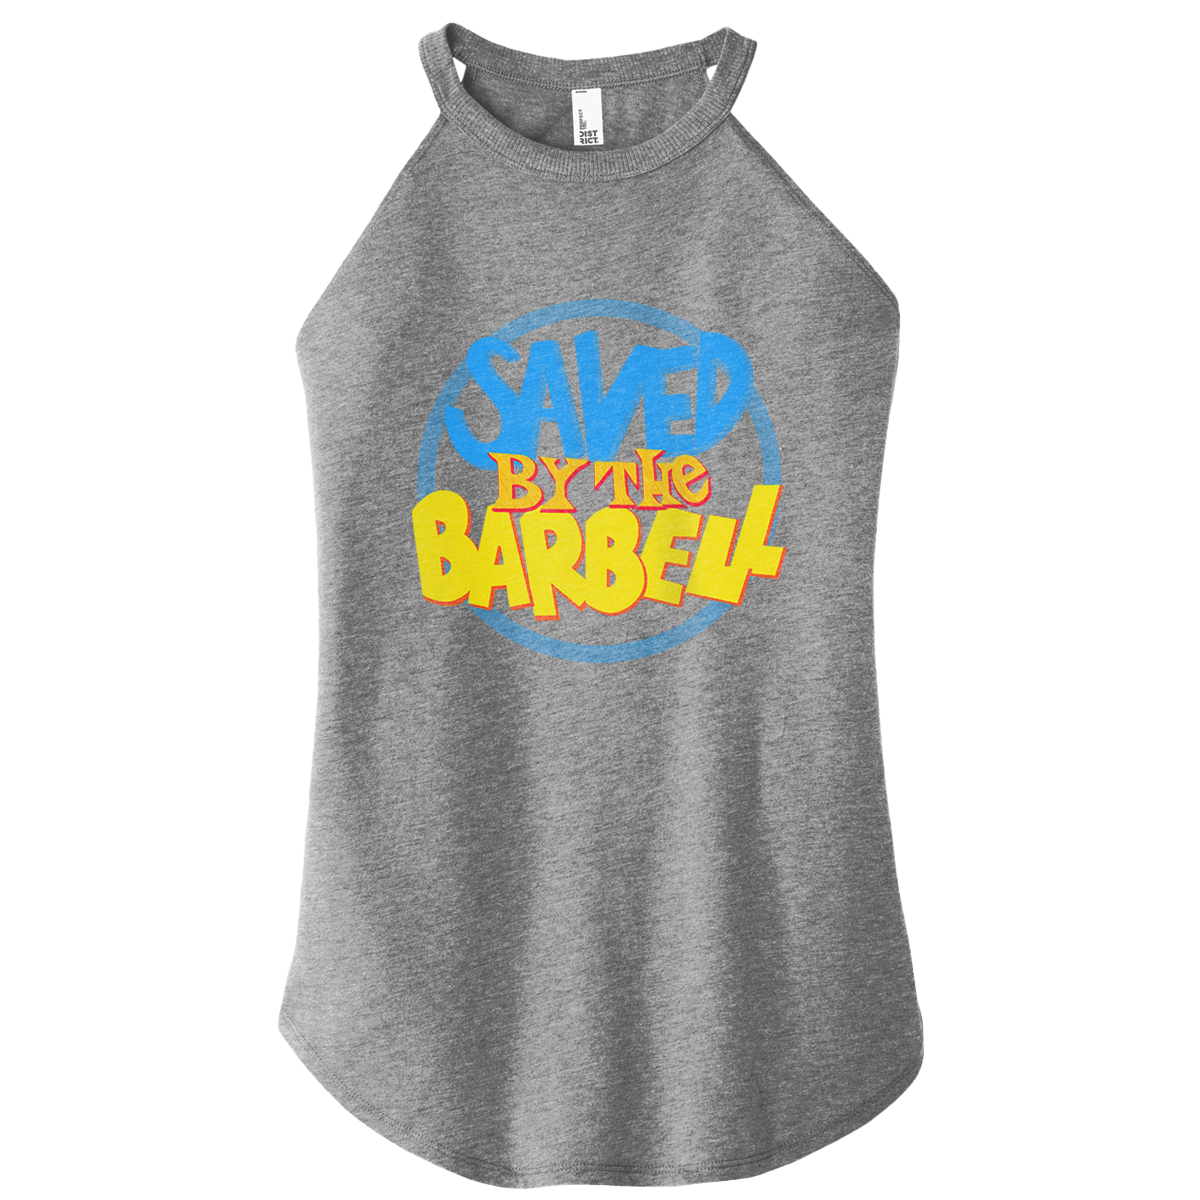 Saved By The Barbell Color Rocker Tank